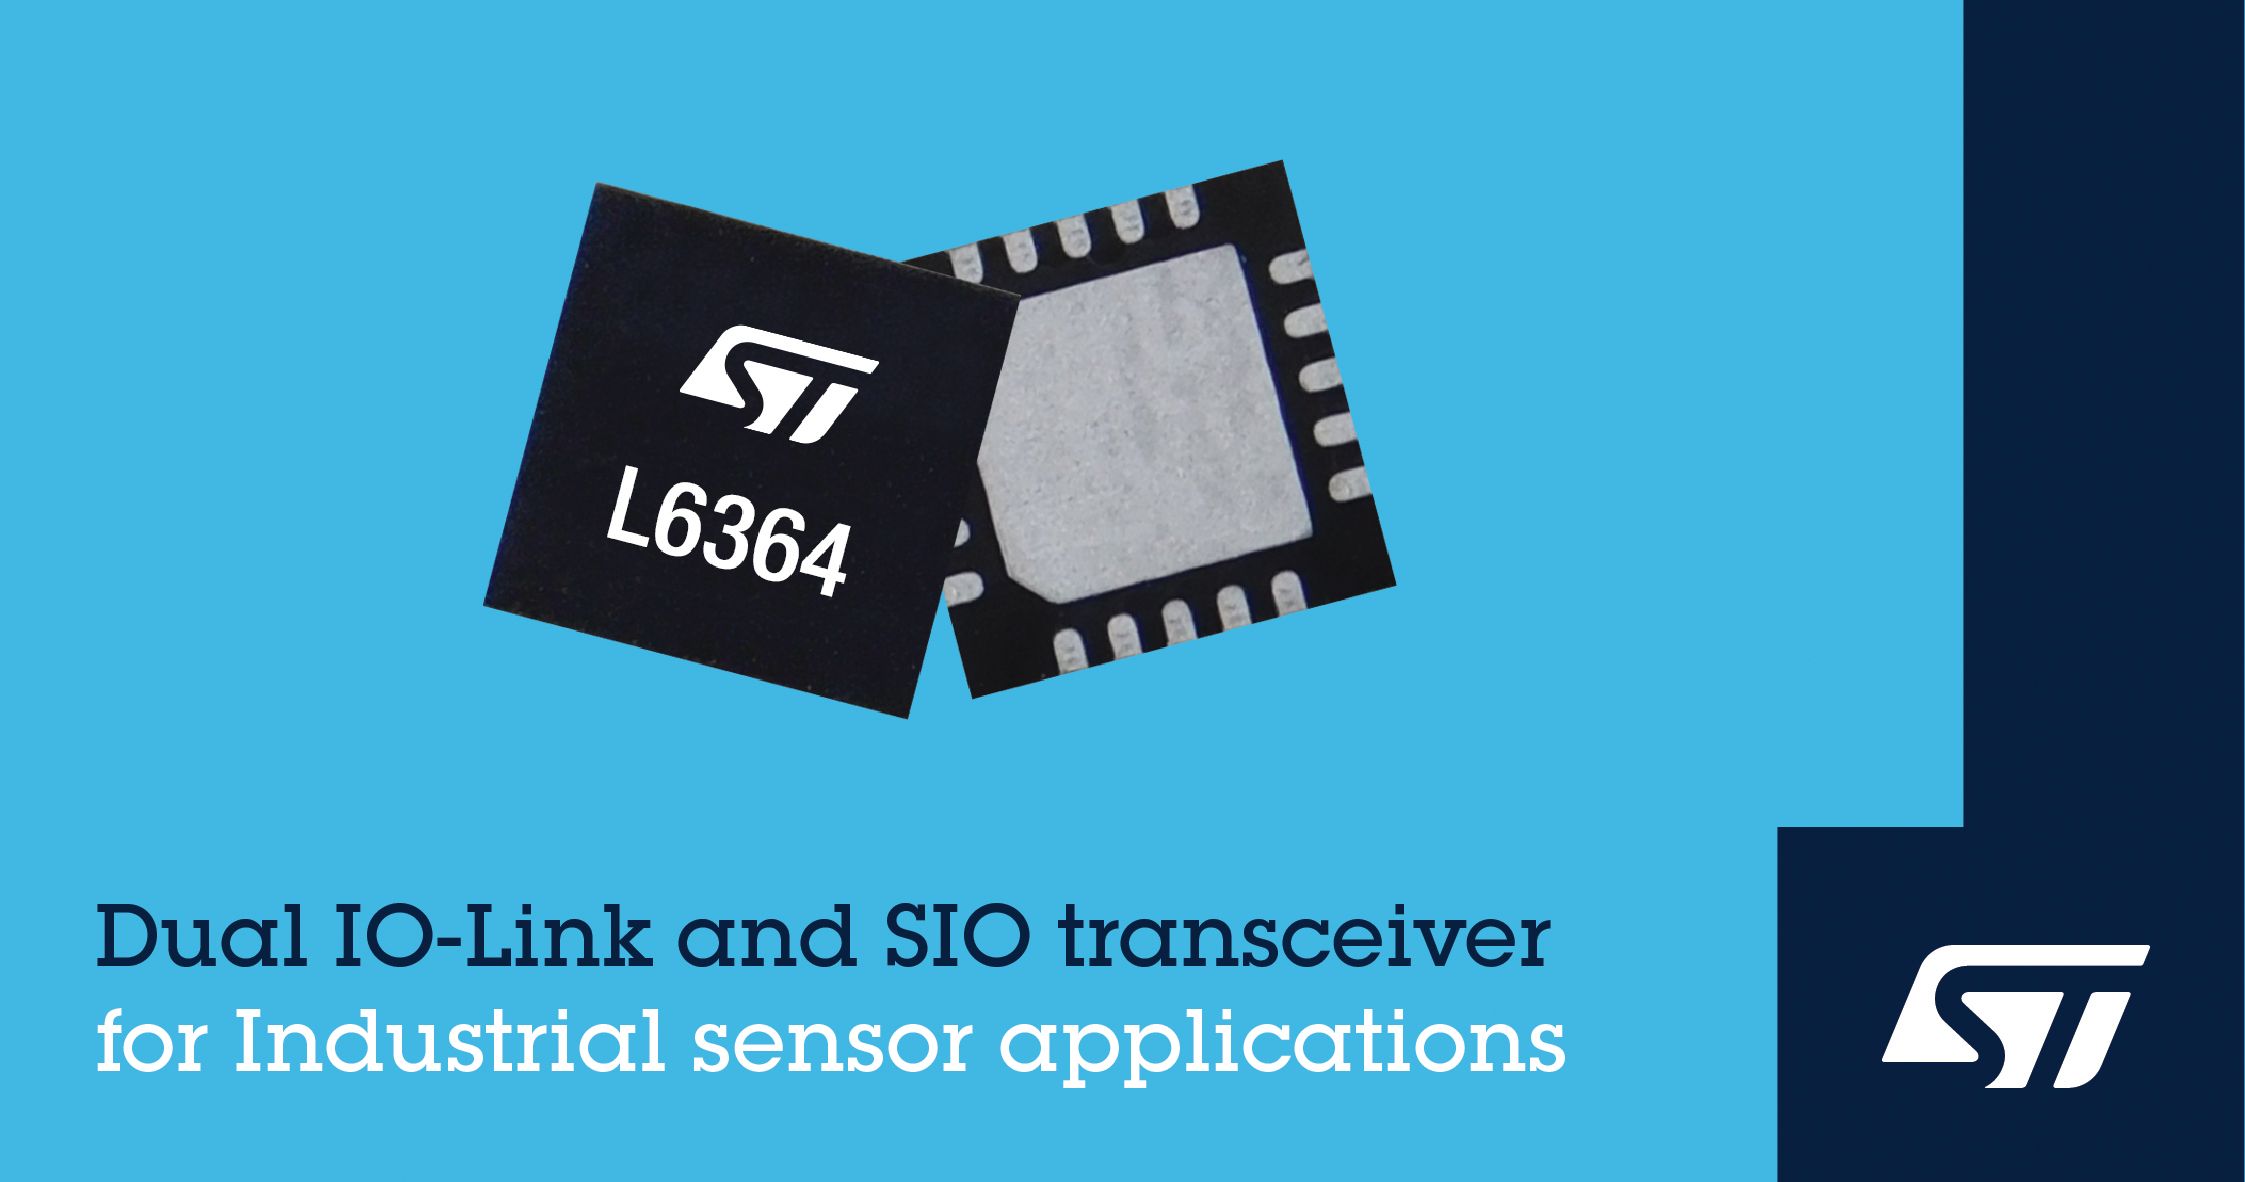 STMicroelectronics Simplifies Sensor Connections with Flexible, Configurable Dual IO-Link and SIO Transceiver